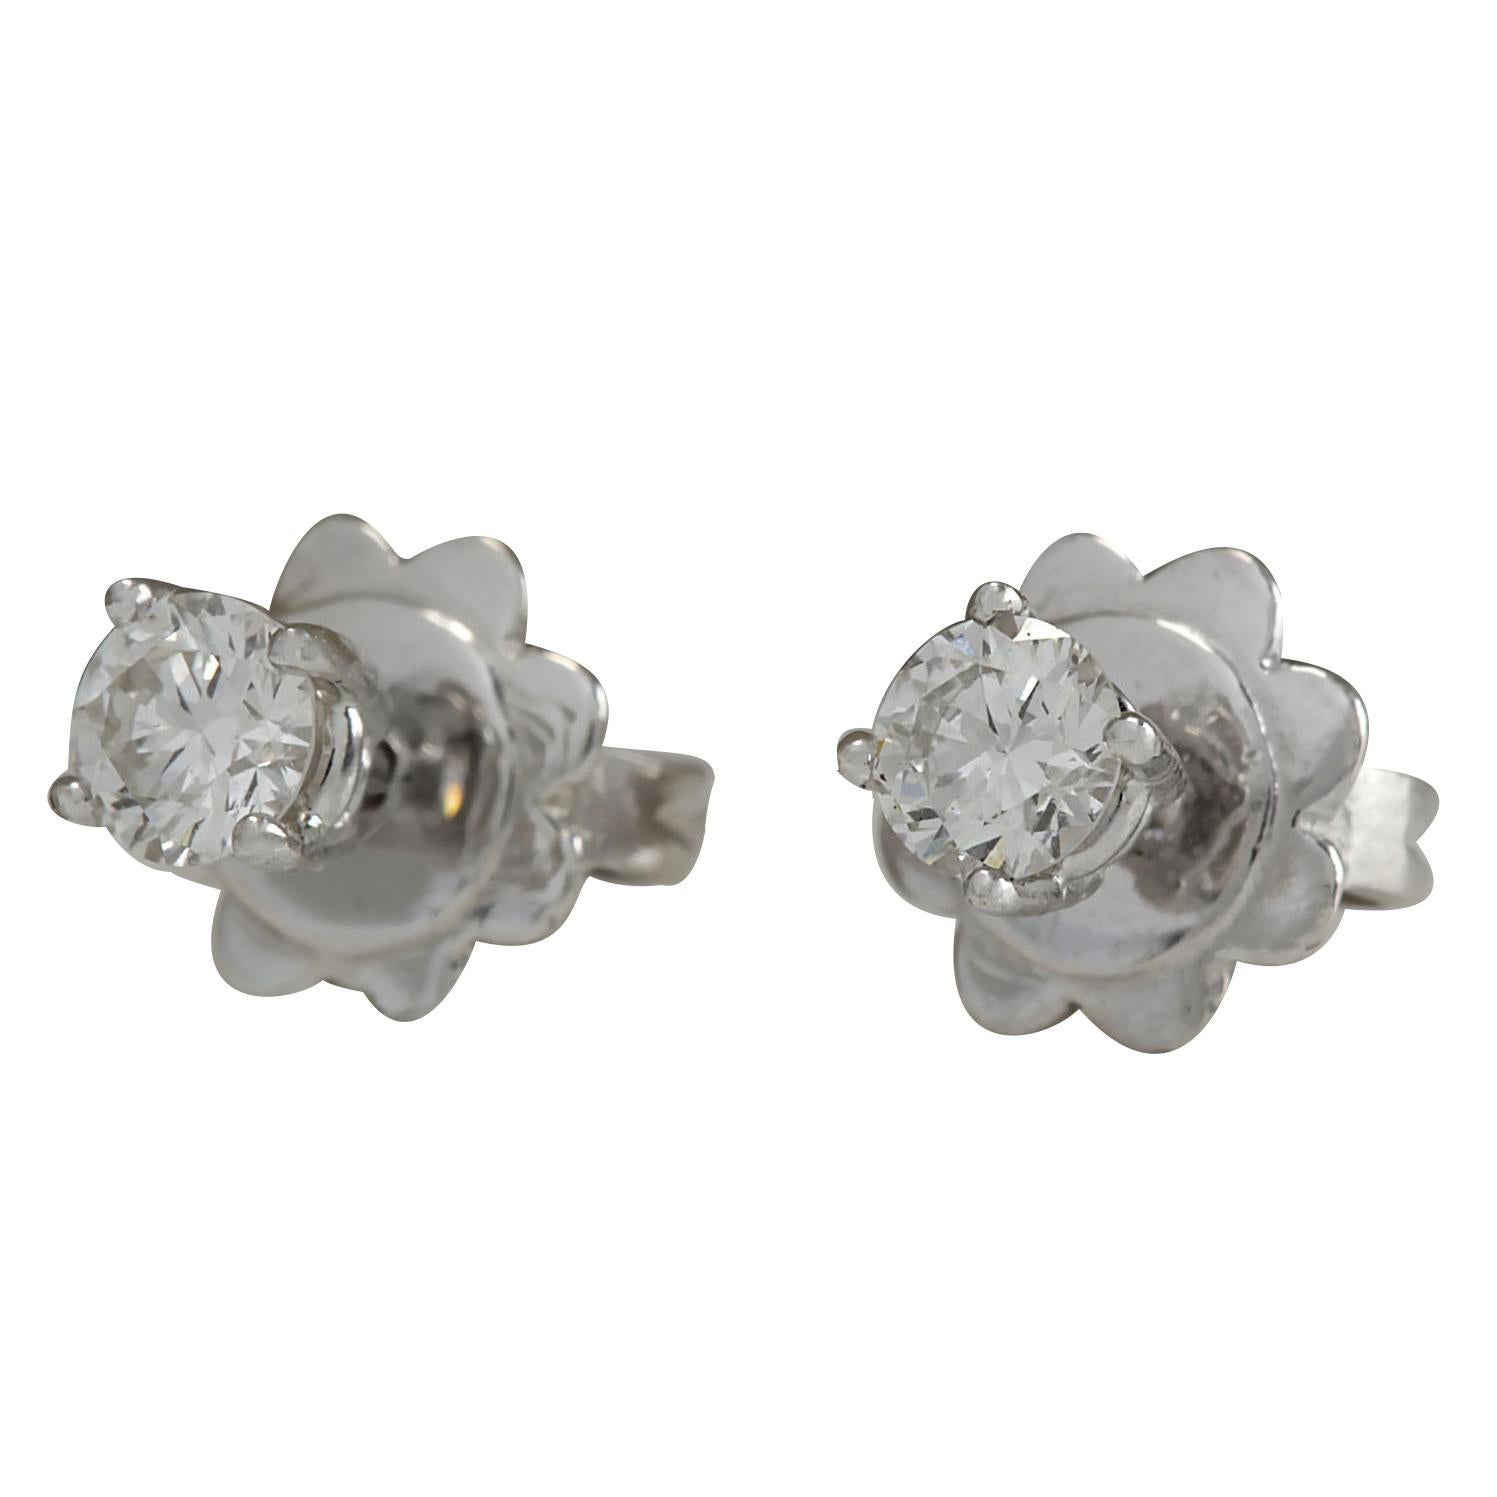 Stamped: 14K White Gold
Earrings Width: 3.20 mm
Total Natural Diamond Weight is 0.30 Carat
Color: F-G, Clarity: VS2-SI1
Face Measures: 3.20x3.20 mm
Sku: [703182W]